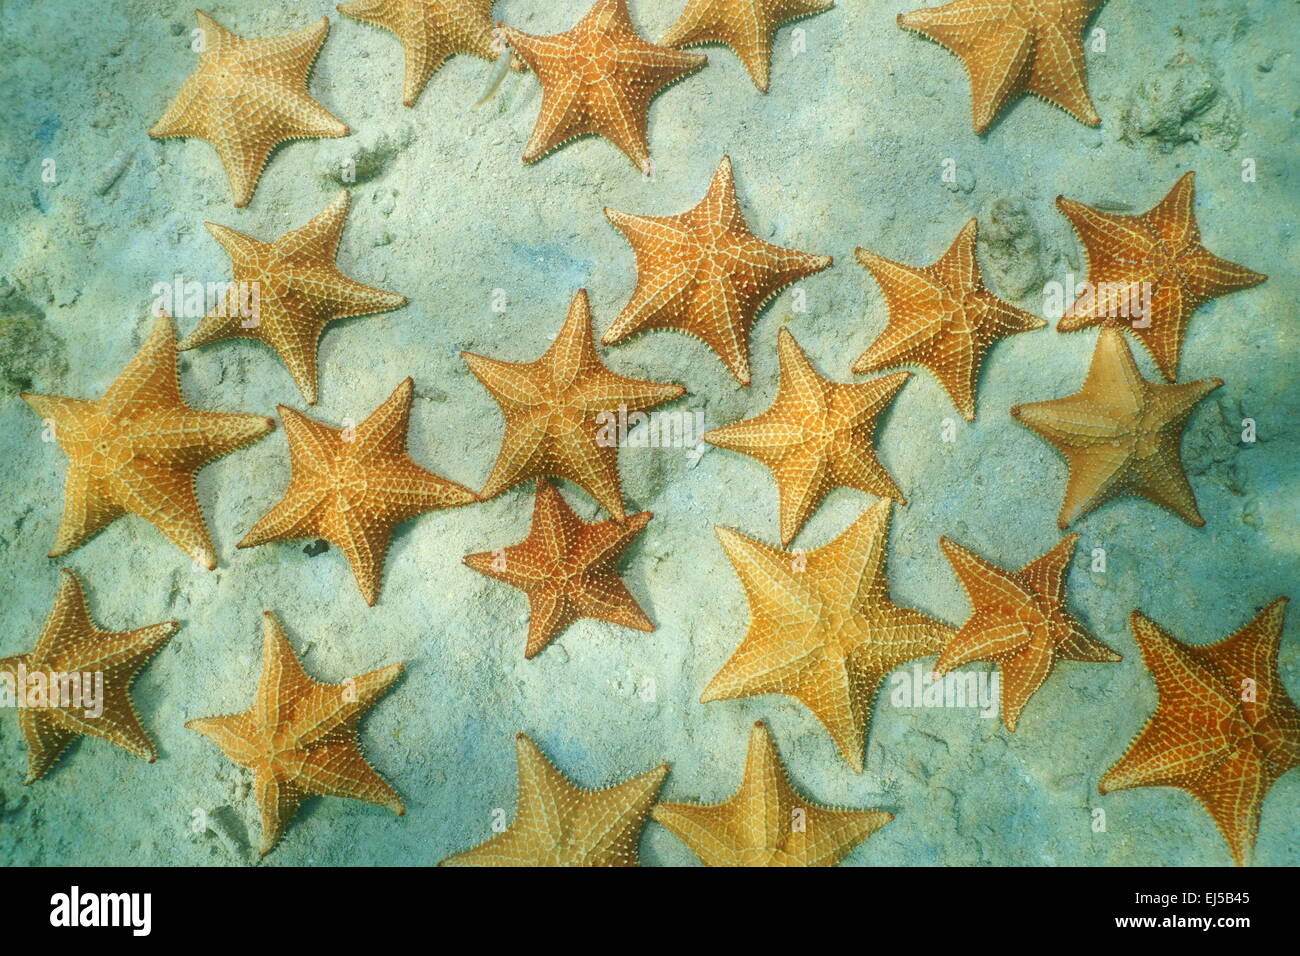 Cluster of starfish under the water on the sand, viewed from above, Caribbean sea, Bocas del Toro, Panama Stock Photo